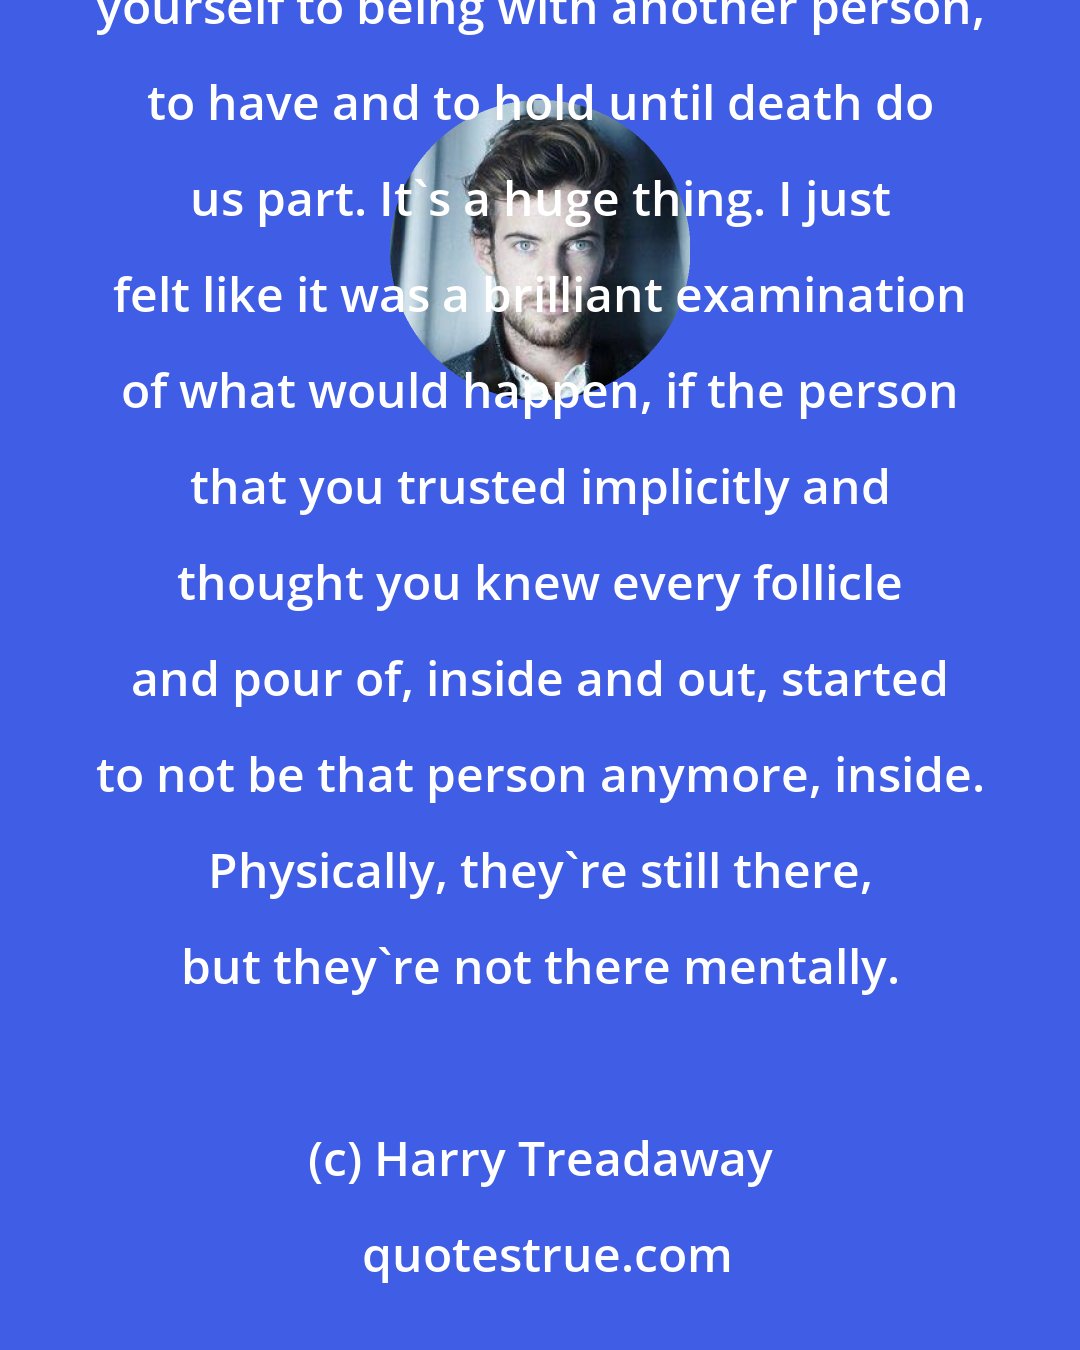 Harry Treadaway: The story revolved around this universal identifiable fear that we must all have, at some point, when you commit yourself to being with another person, to have and to hold until death do us part. It's a huge thing. I just felt like it was a brilliant examination of what would happen, if the person that you trusted implicitly and thought you knew every follicle and pour of, inside and out, started to not be that person anymore, inside. Physically, they're still there, but they're not there mentally.